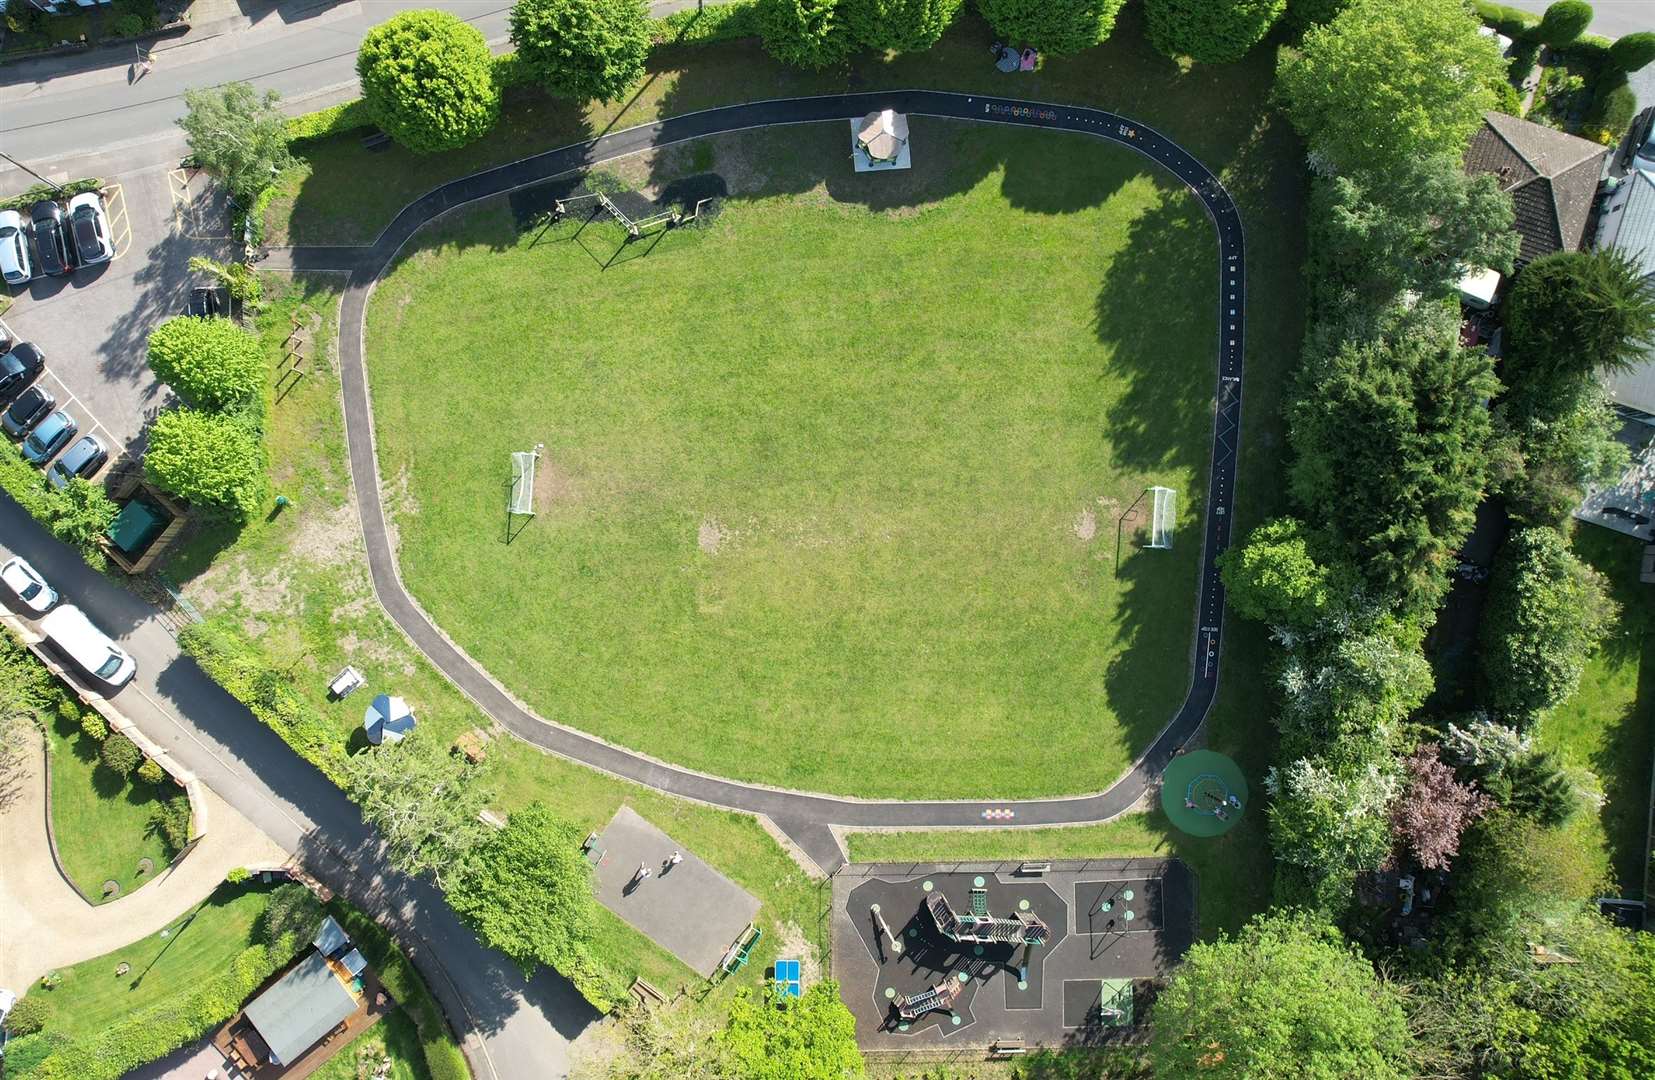 Aerial view of the playground. Picture: Offham Parish Council